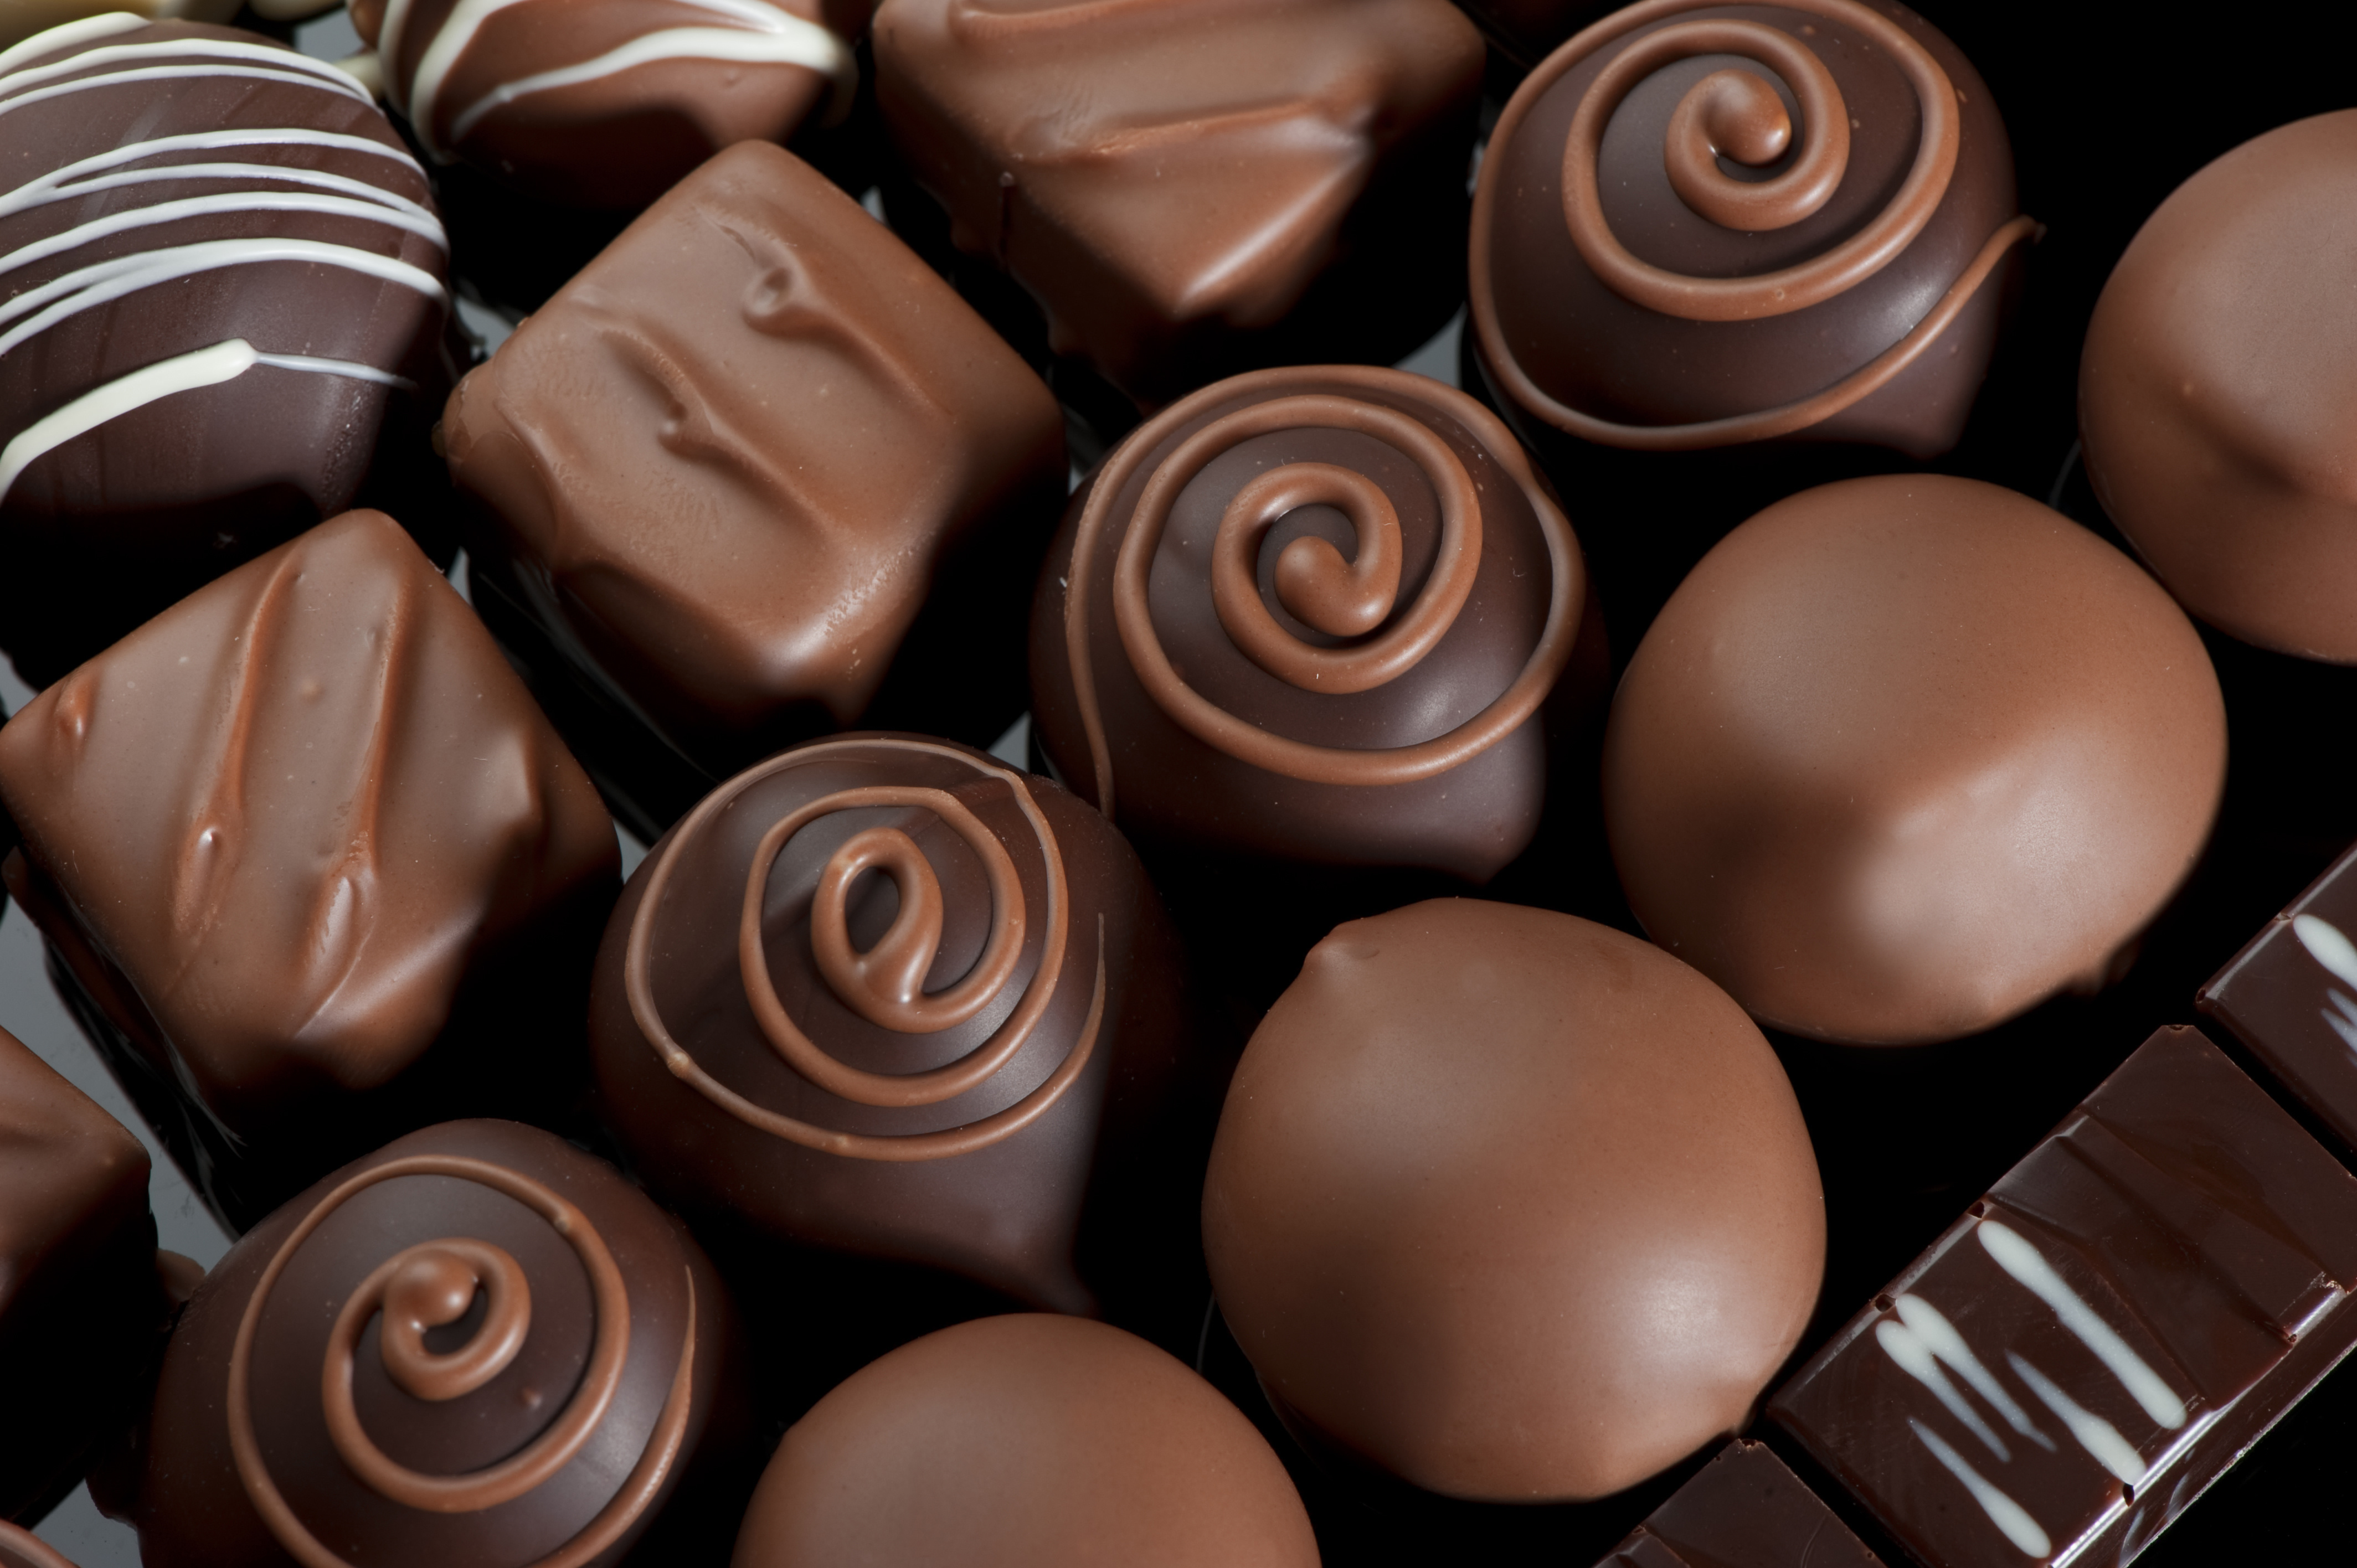 Free download wallpaper Chocolate Chocolate candy download photo wallpaper [4256x2832] for your Desktop, Mobile & Tablet. Explore Chocolate Candy Wallpaper. Chocolate Bar Wallpaper, Chocolate Wallpaper for Desktop, Candy Wallpaper for Computer